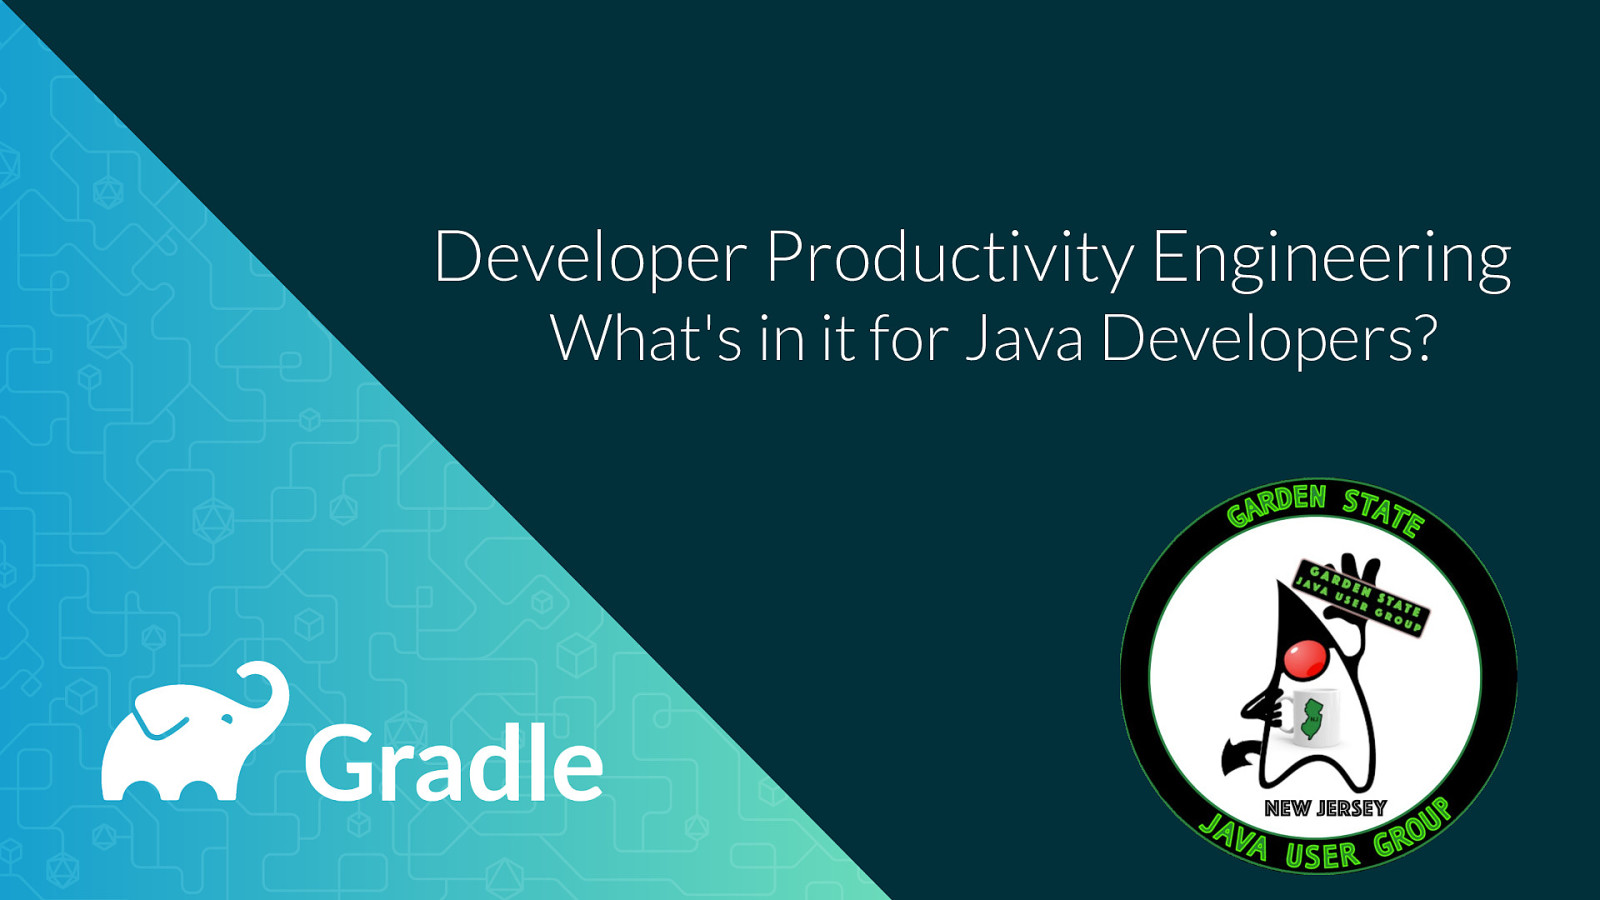 Developer Productivity Engineering: What’s in it for Java Developers?